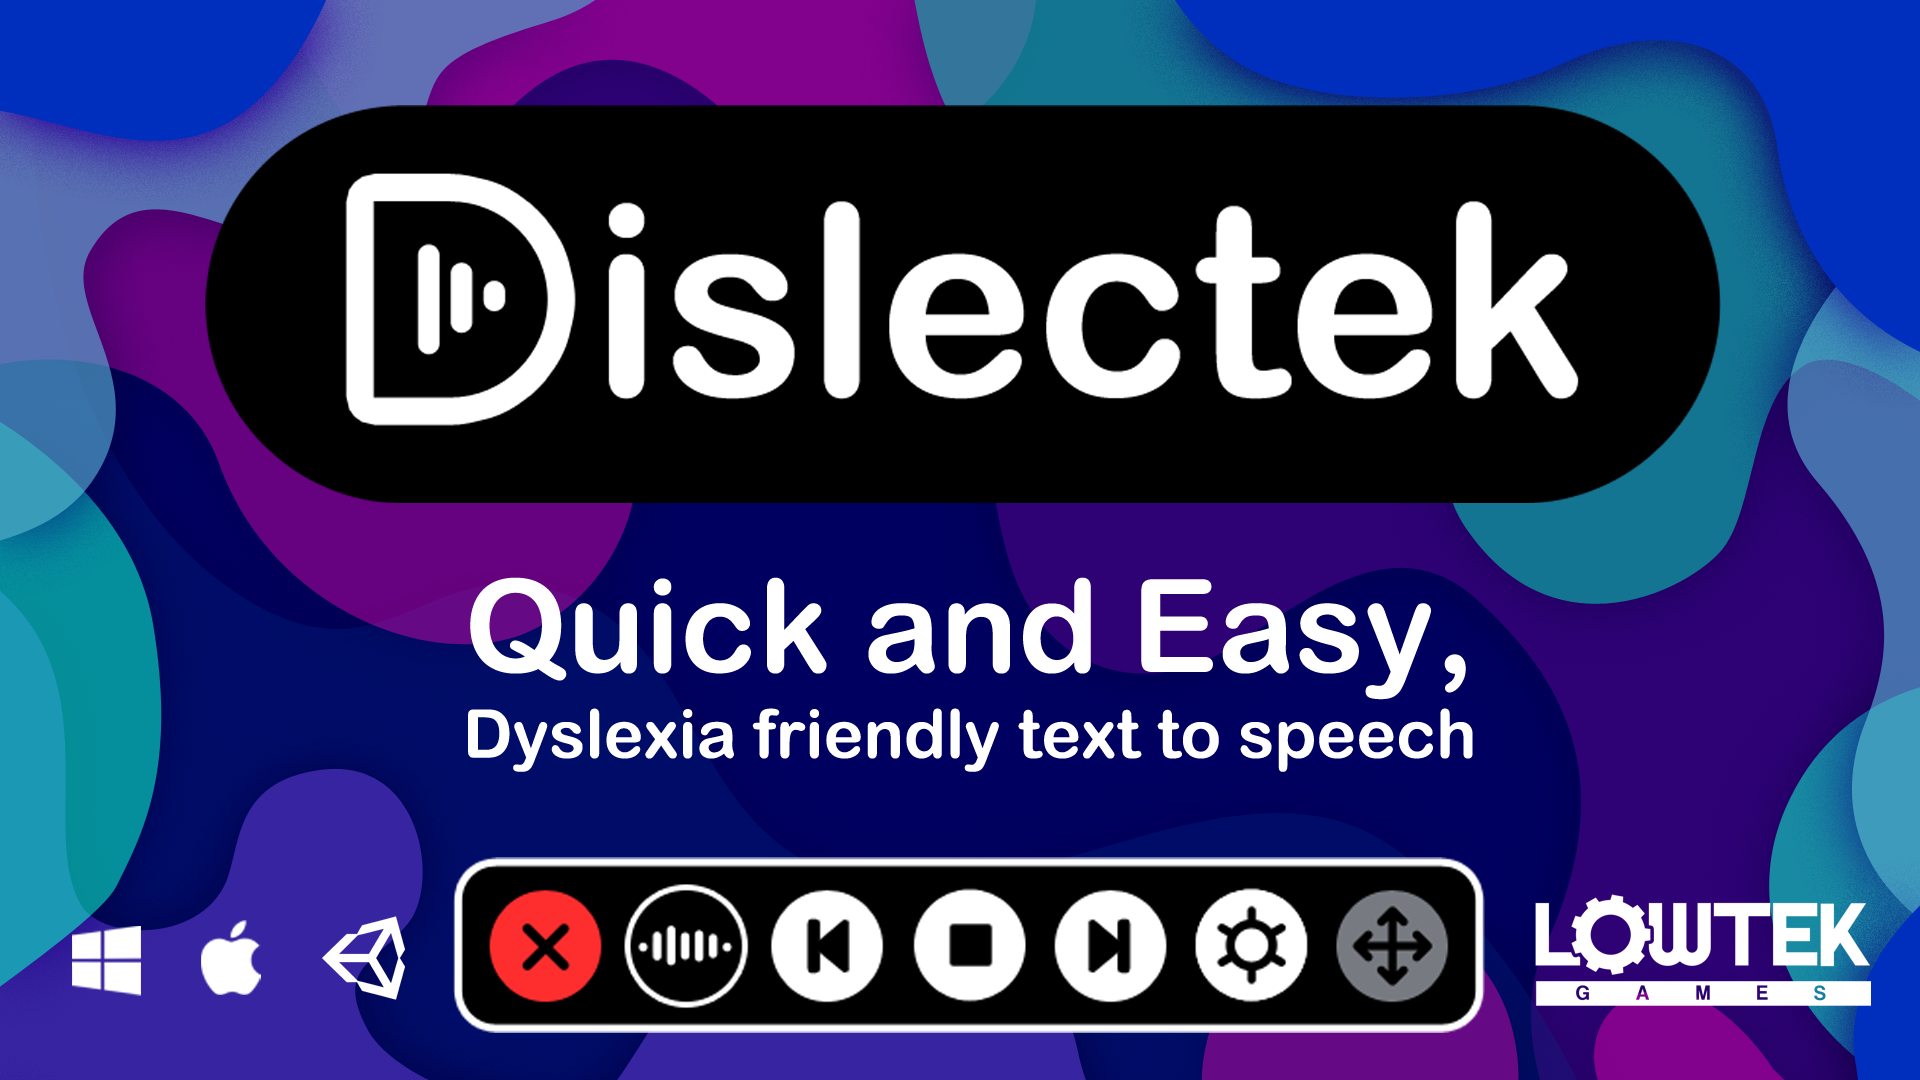 Make Your Game More Accessible With Dislectek